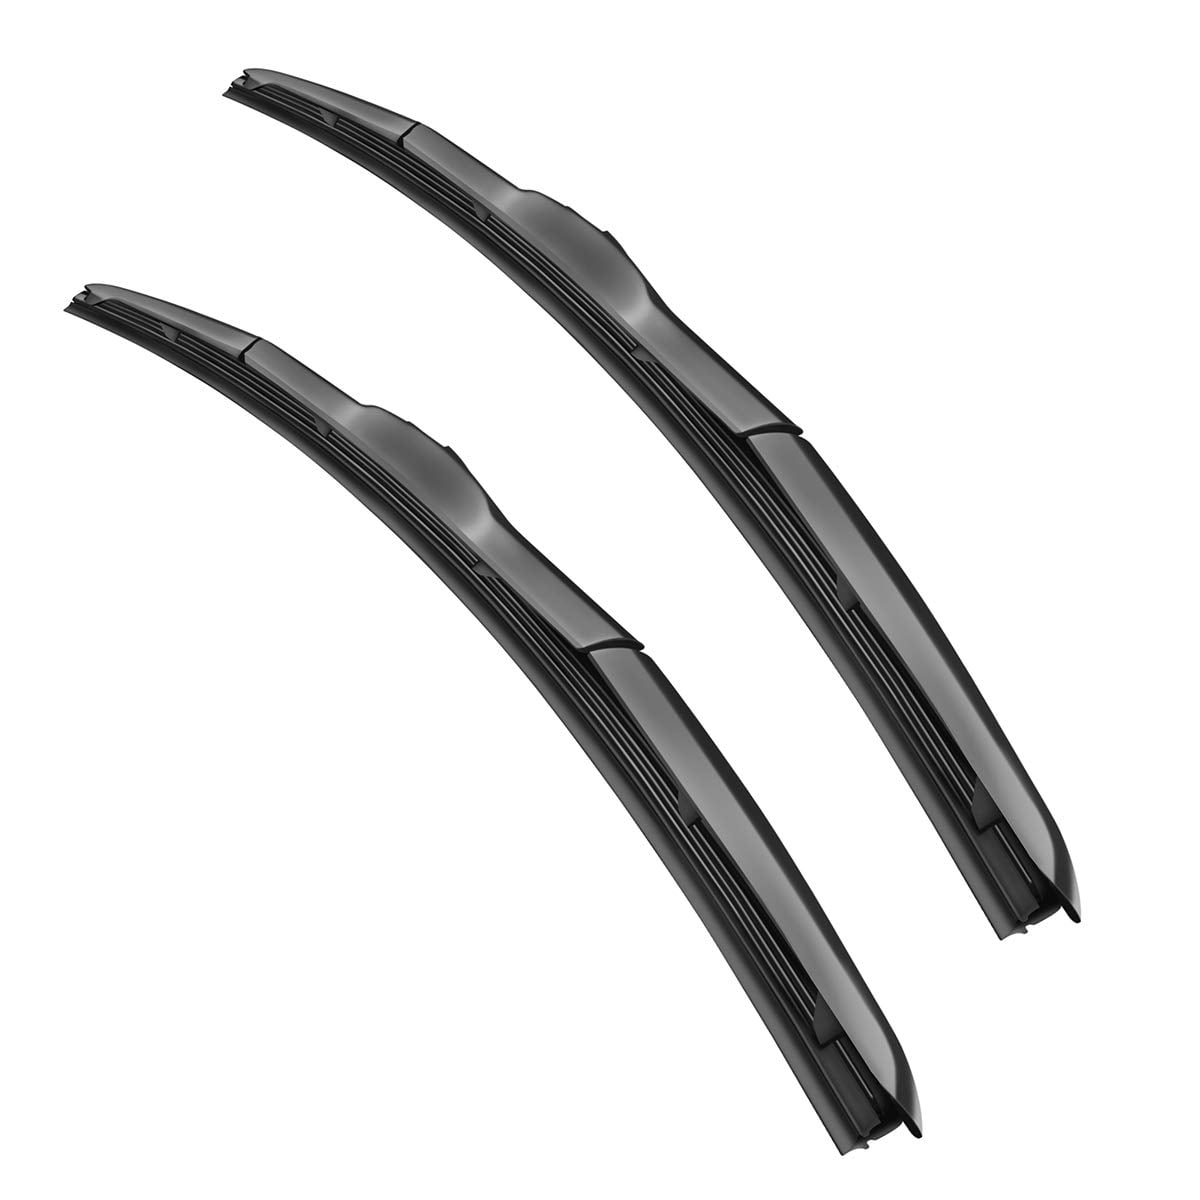 Extreme Weather Beam Wiper Blades VIEW MAX Windshield Wiper Blades EXTREME Pack of 2 24+19 - All Weather 